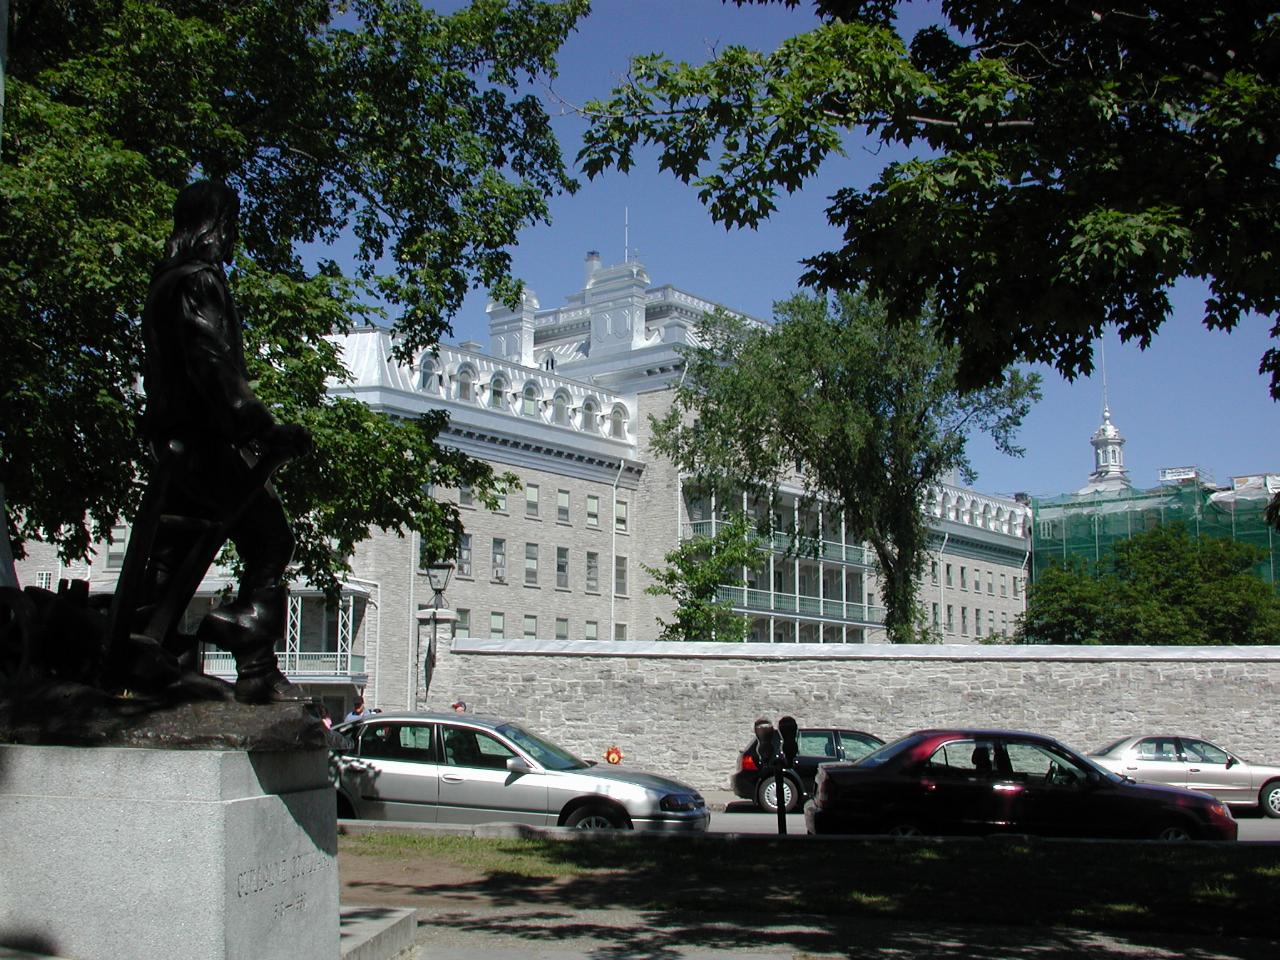 Part of Laval University, as seen from founder's statue in Montmorency Park